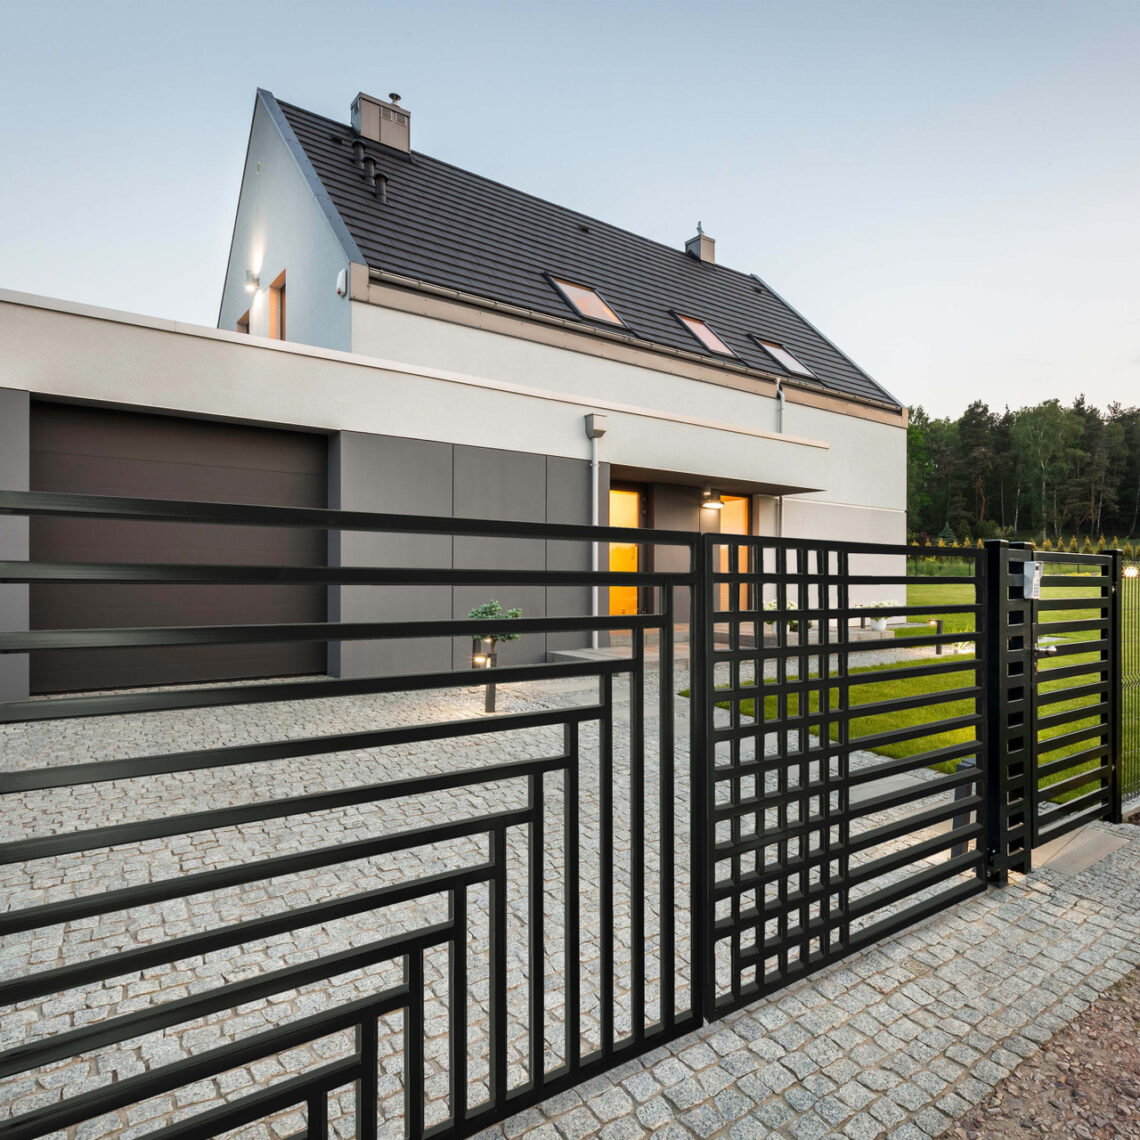 driveway gate with modern home